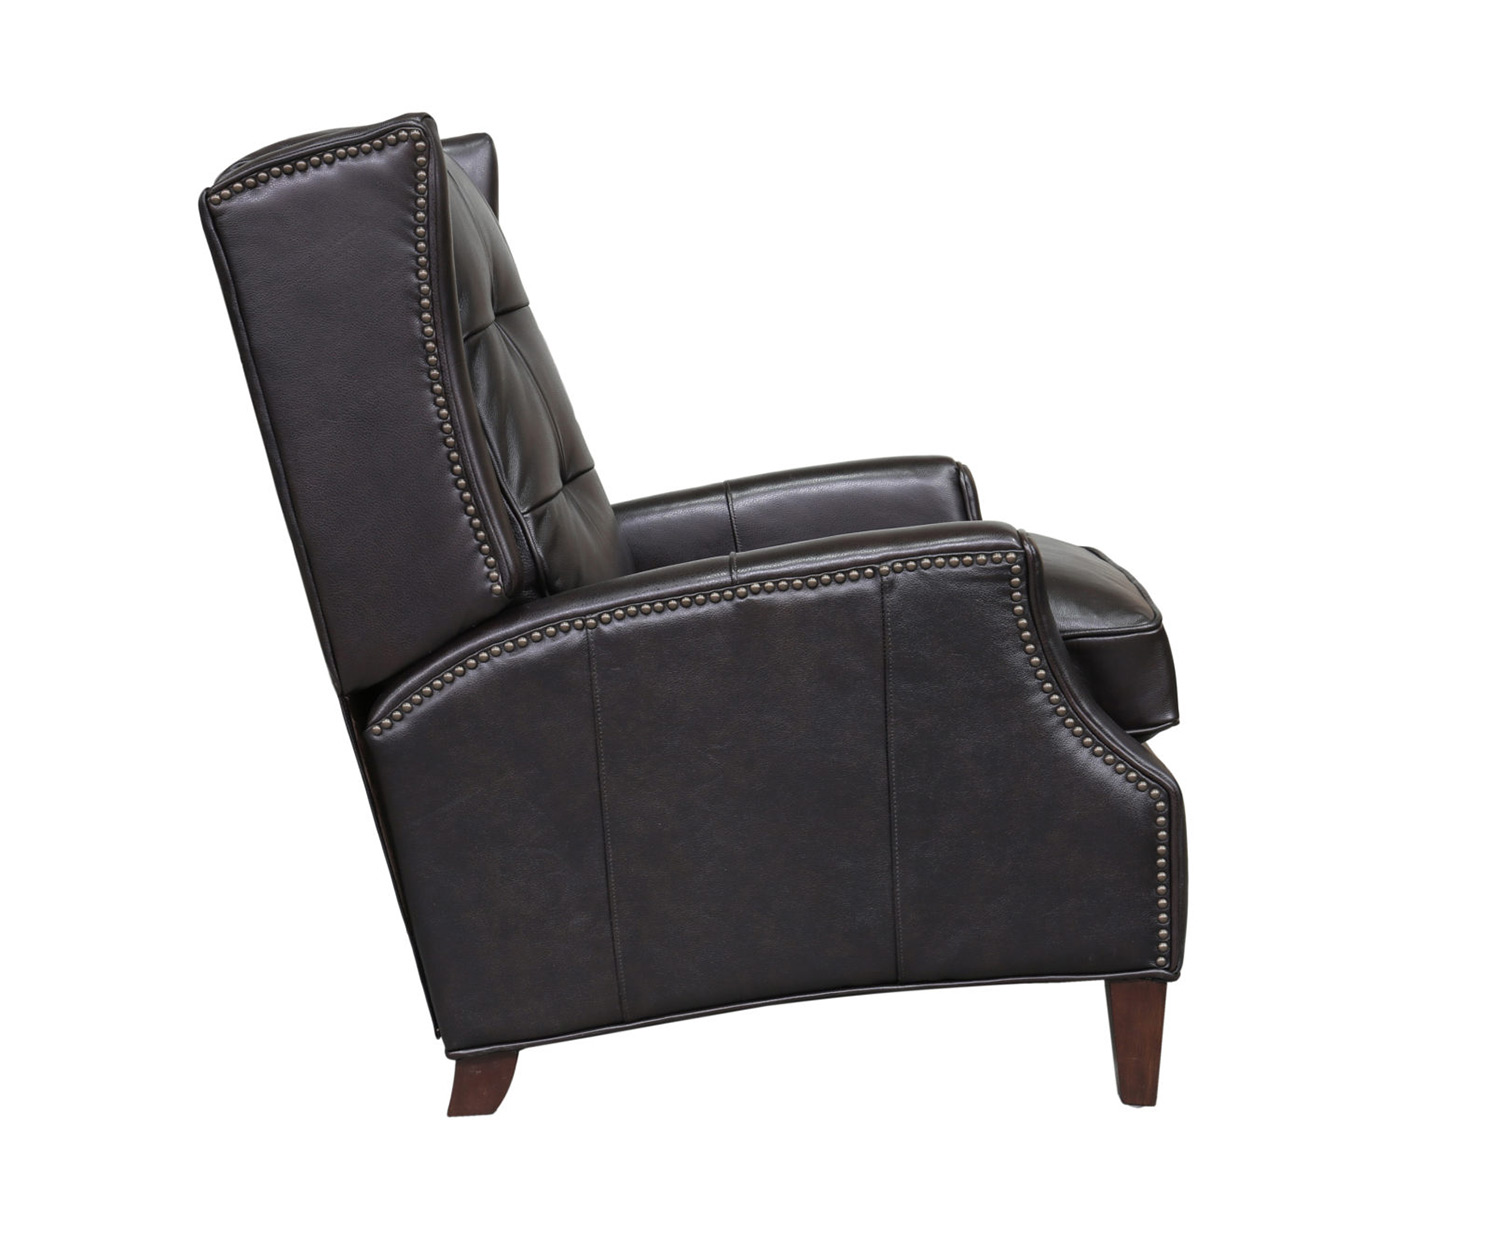 Barcalounger Lincoln Recliner Chair - Shoreham Fudge/all leather